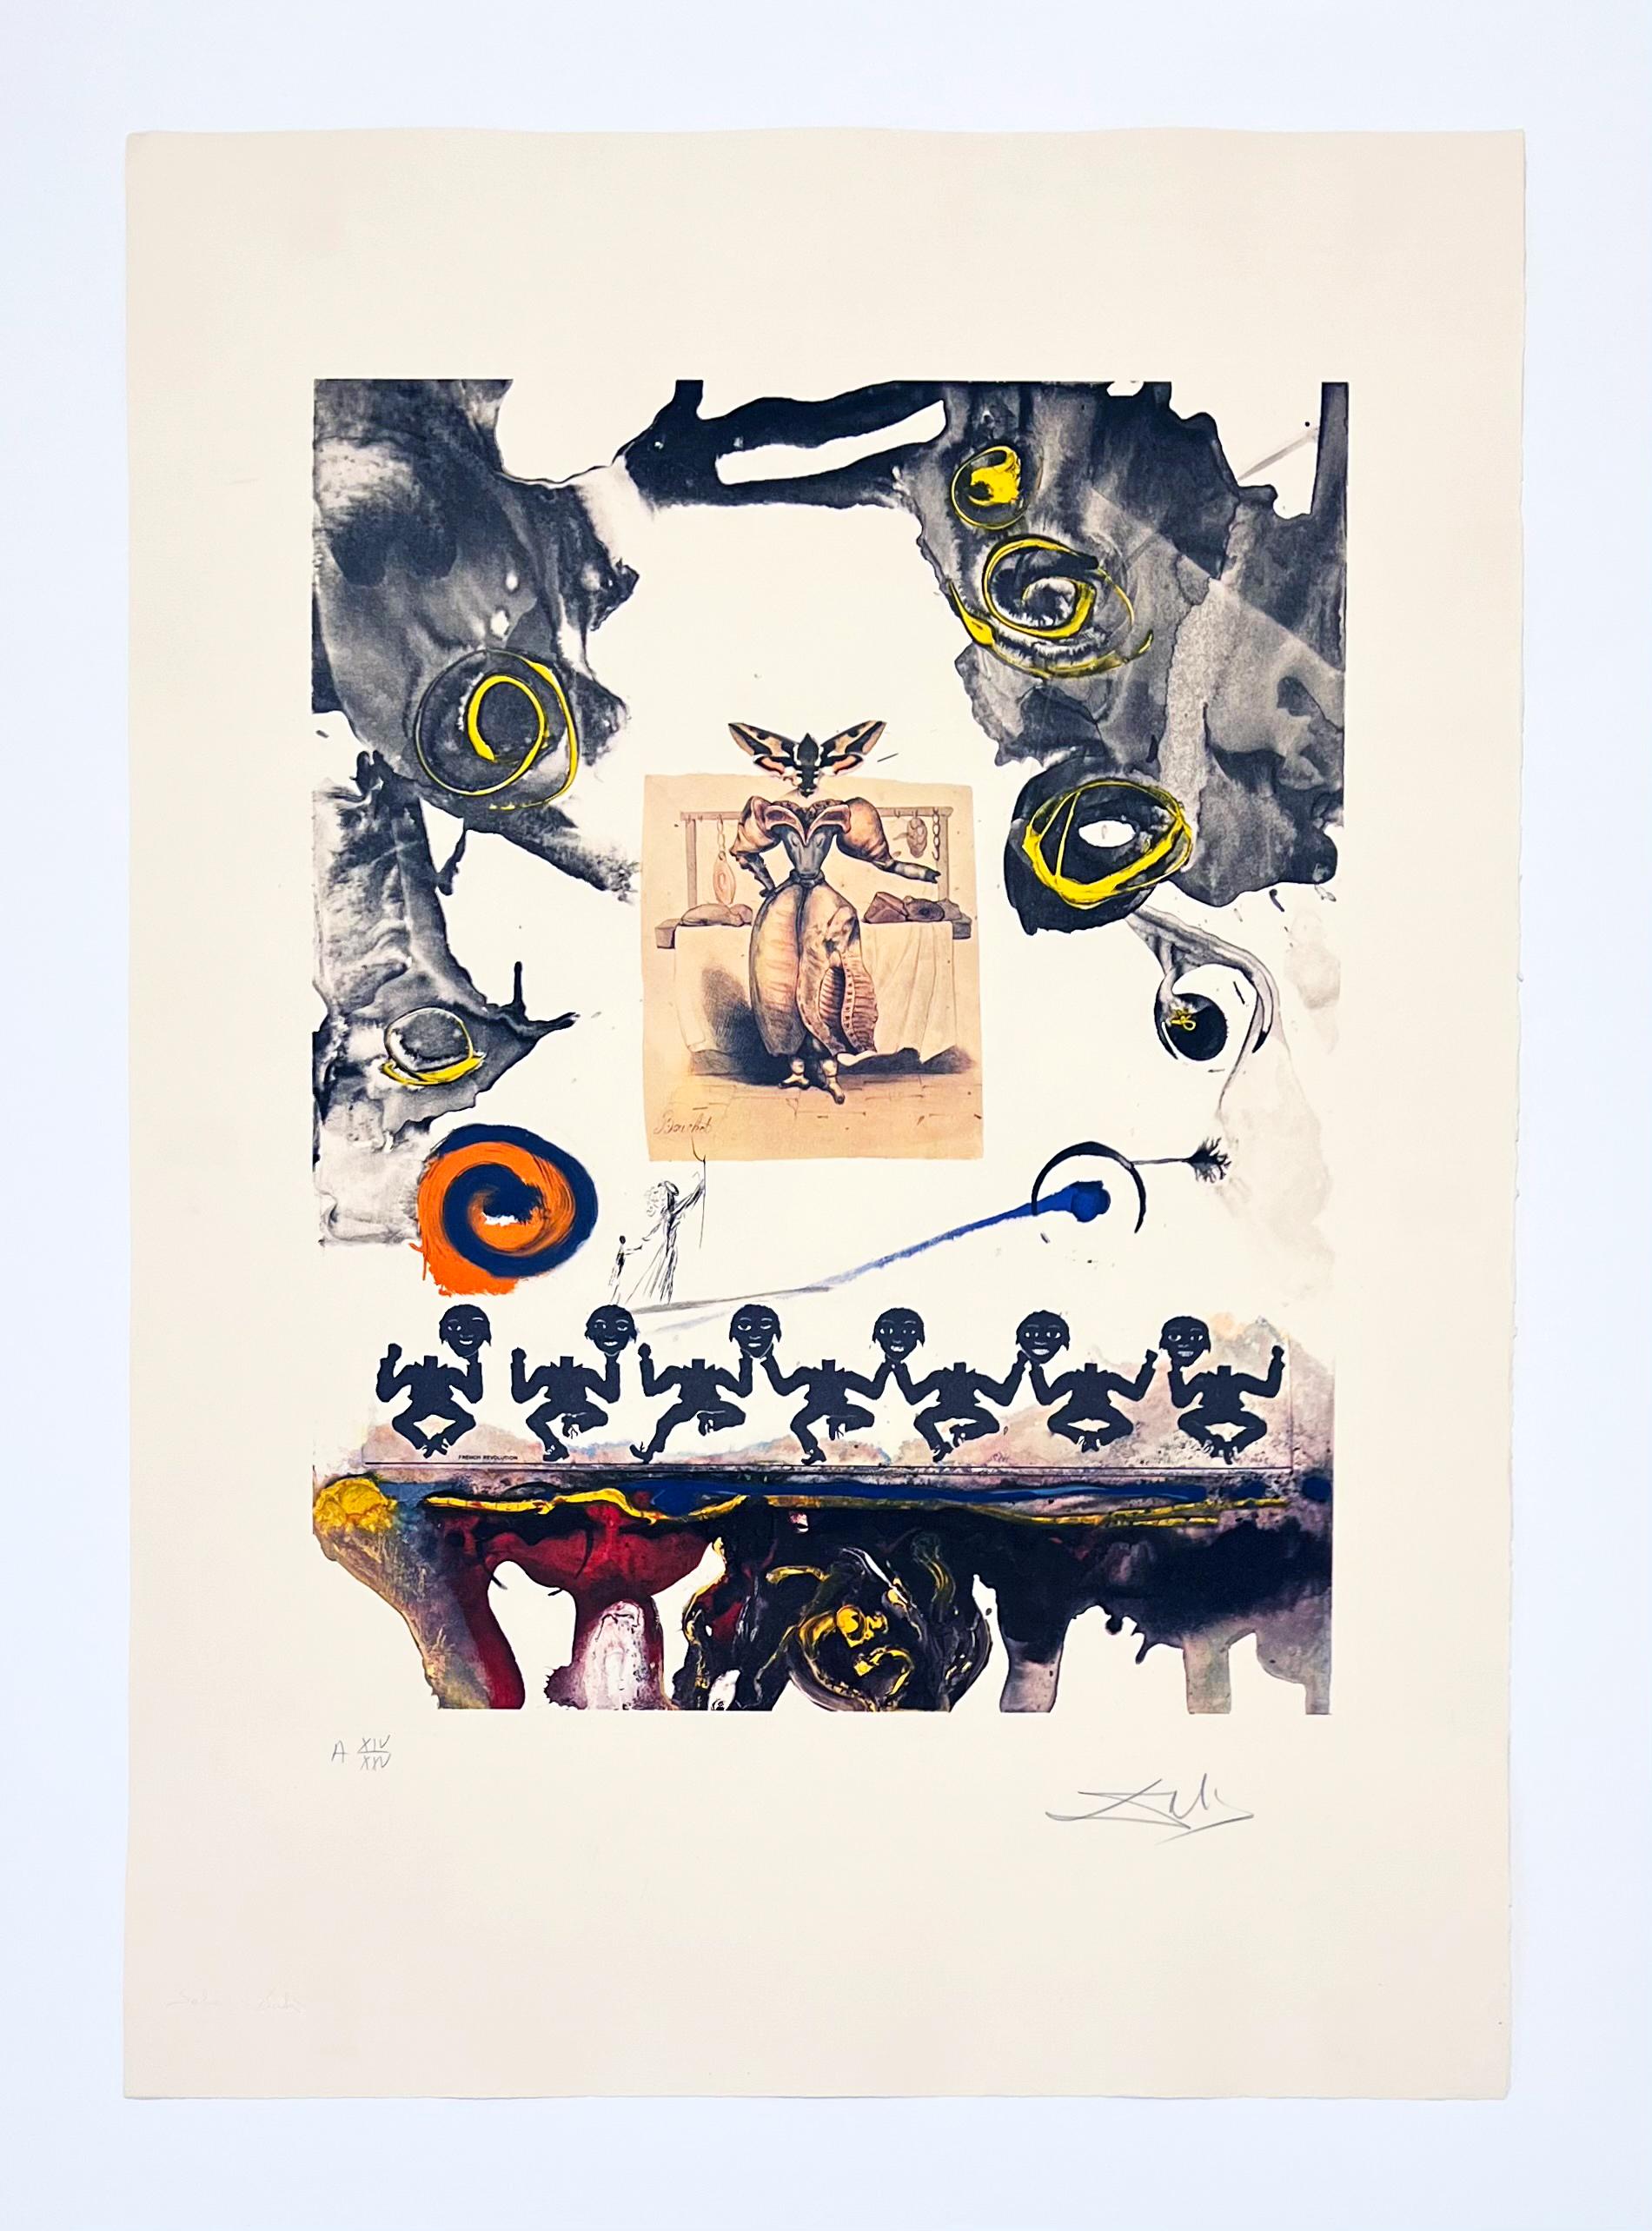 Surrealist Gastronomy, from 1971 Memories of Surrealism - Print by Salvador Dalí